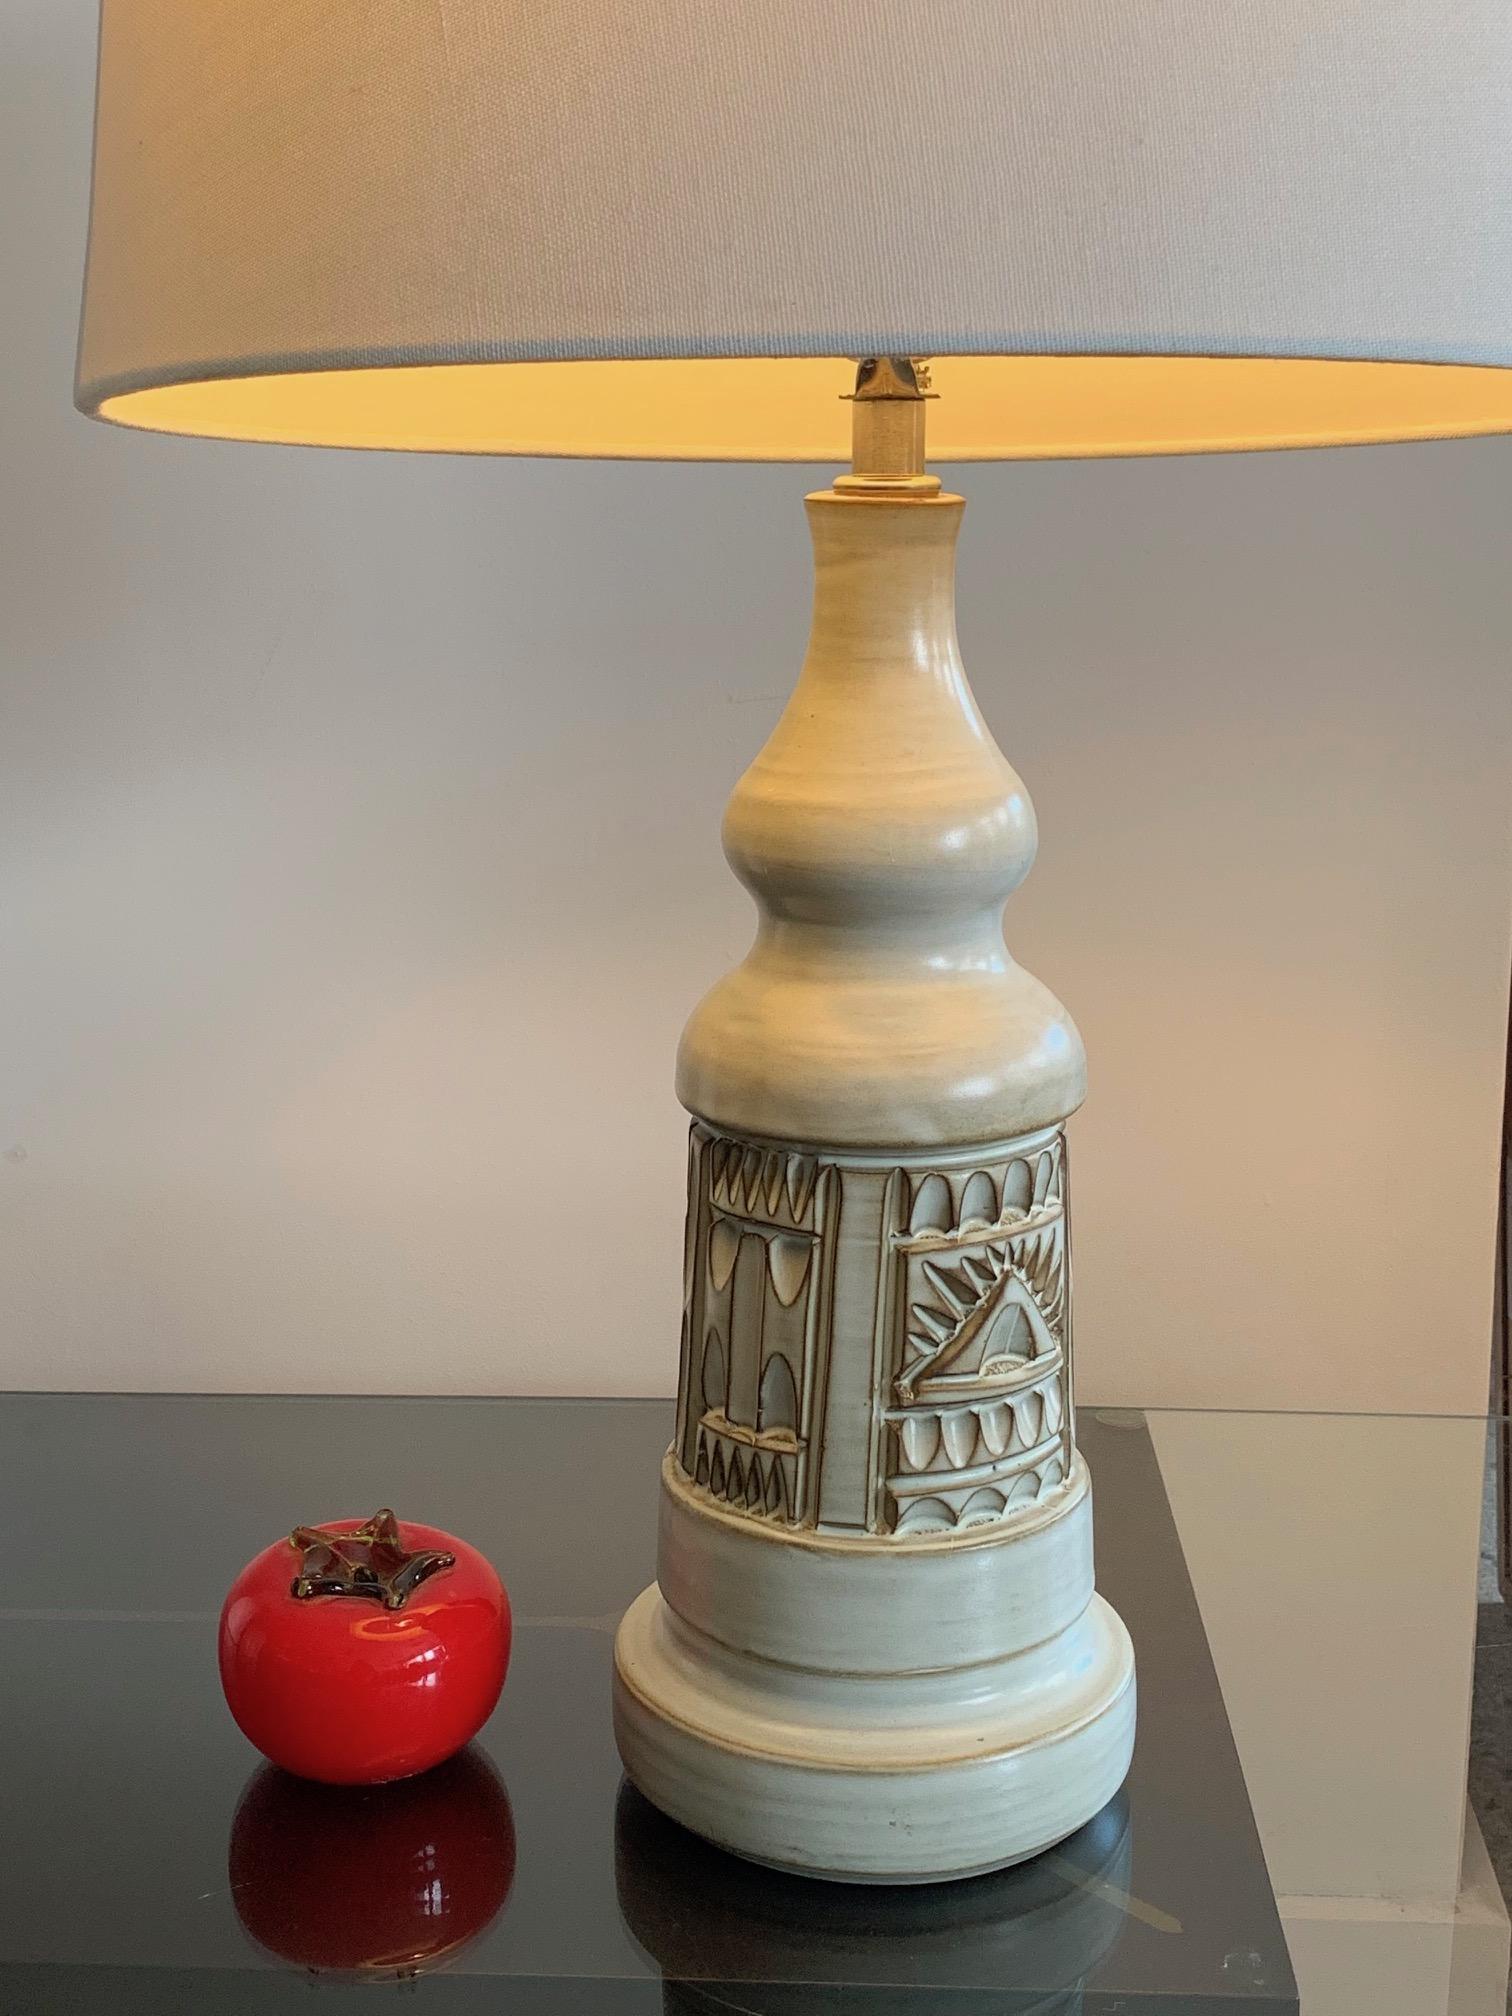 A charming lamp by Marius Bessone, Vallauris, France. Beautiful off-white glaze with stylized geometric motif, typical of his work from late 1960s-1970s. Ceramic base alone measures approximate: 14.5